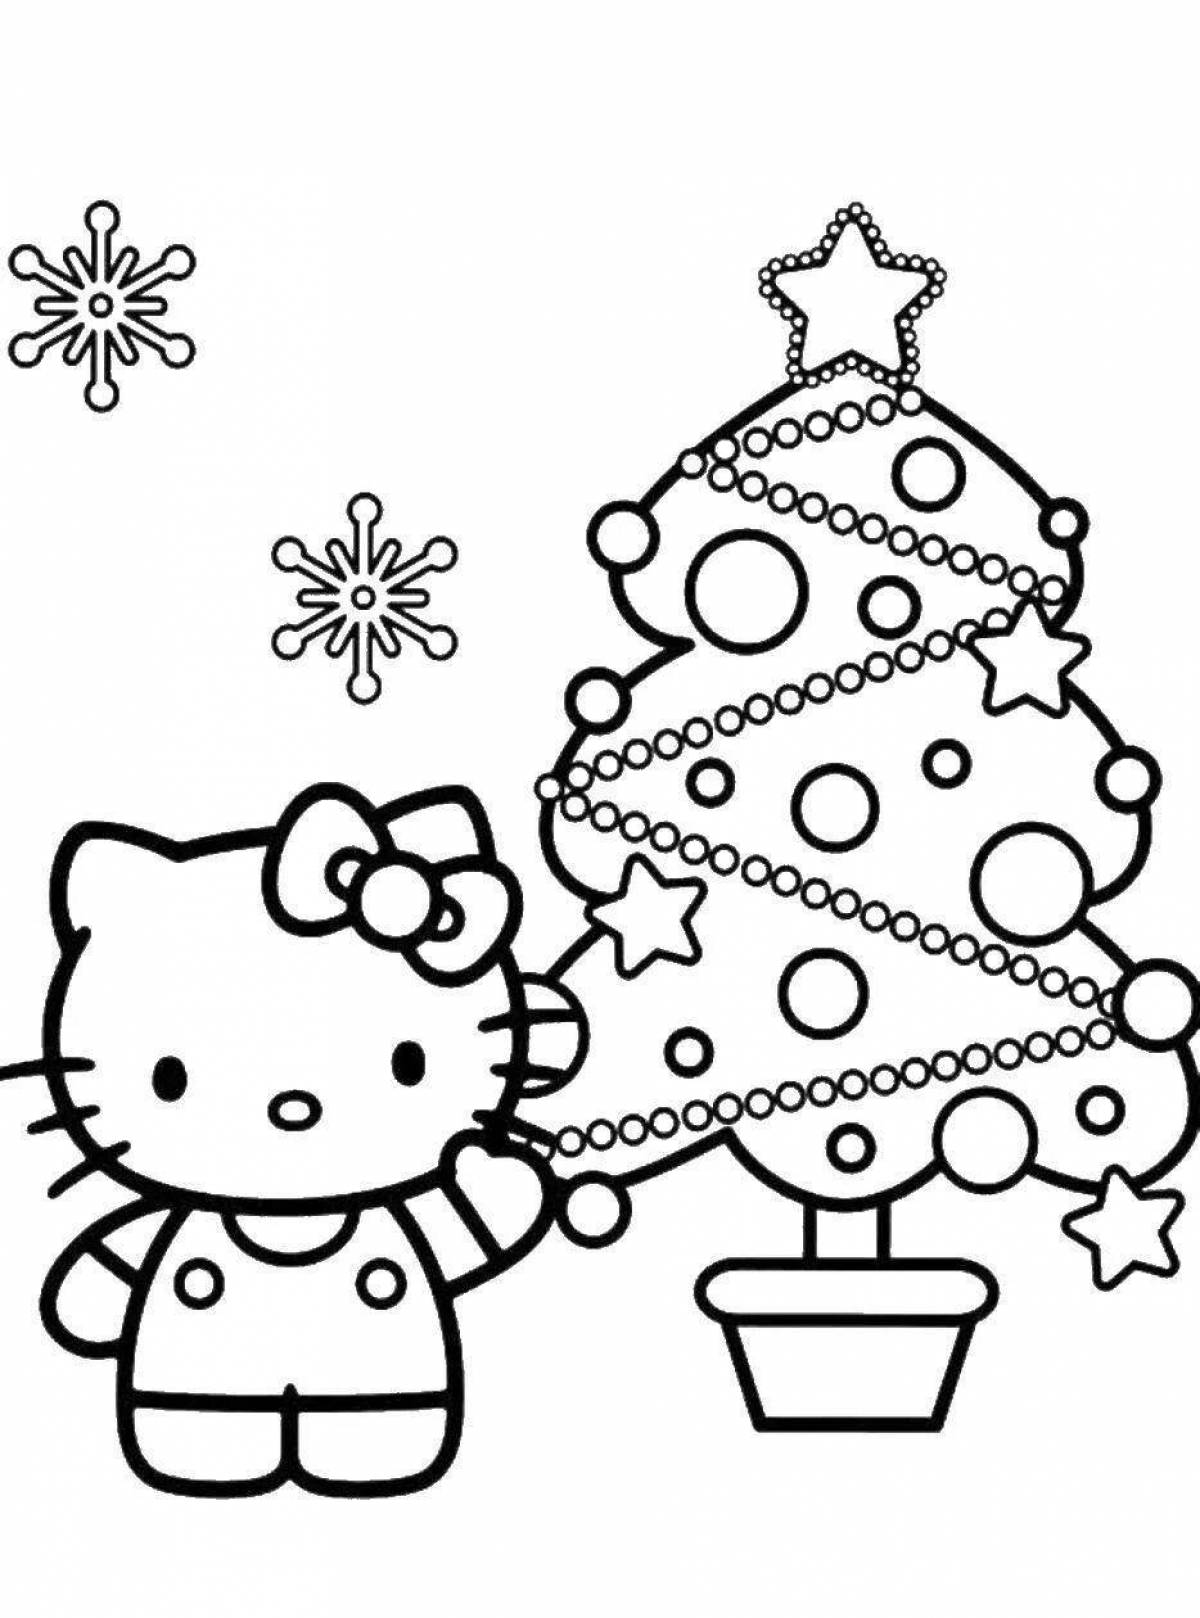 Dazzling Christmas coloring book for kids